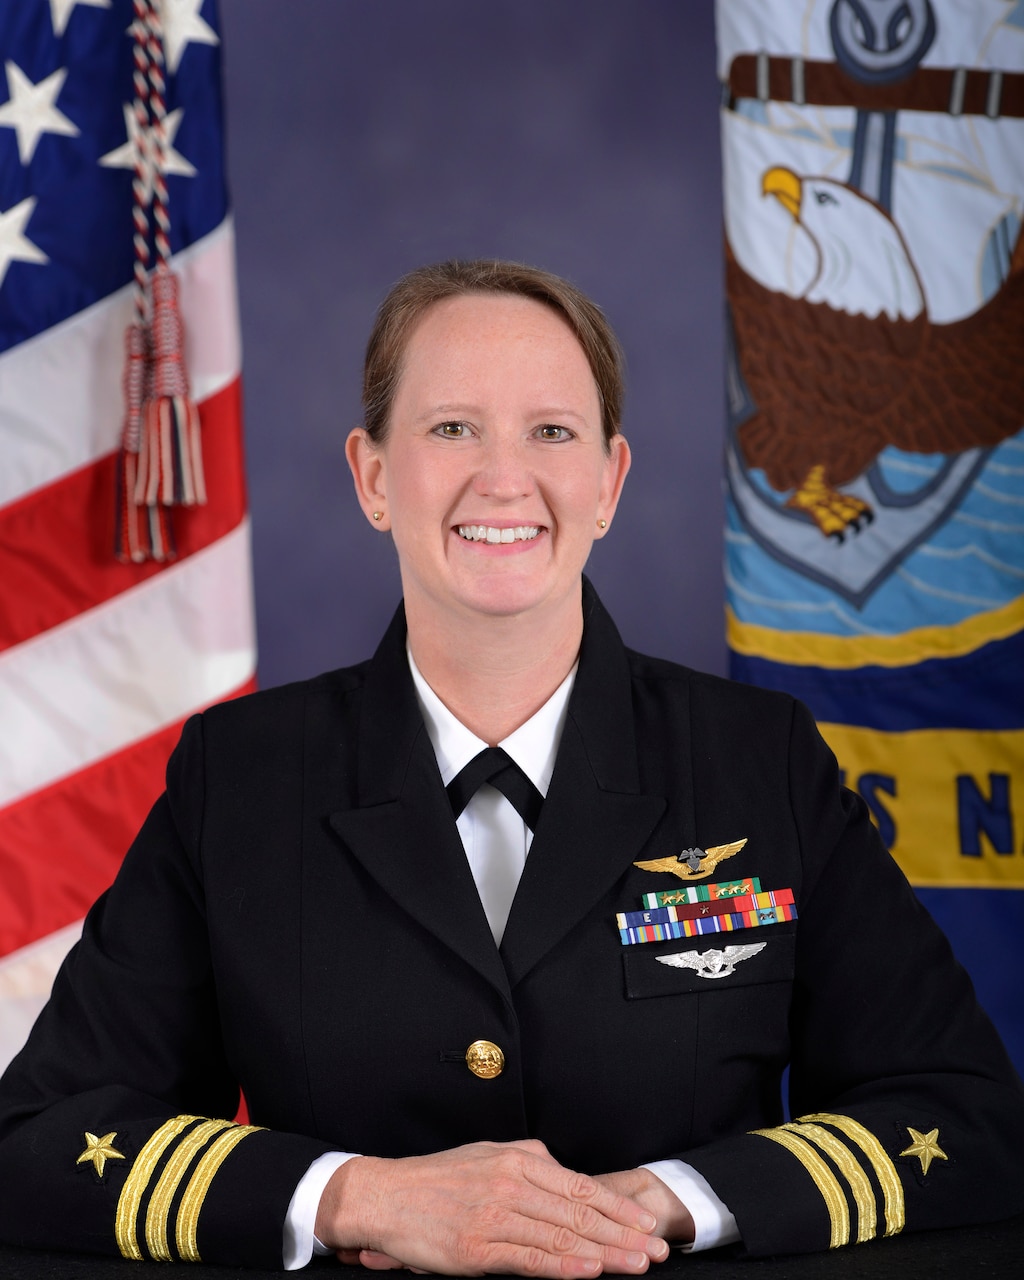 Cmdr. Rebecca Anderson, military assistant program manager for logistics (APML). Anderson, a native of Catonsville, Maryland, enlisted in the Navy 20 years ago, working in maintenance and logistics and earning her officer commission in 2010. She joined the TACAMO program office at Naval Air Station Patuxent River, Maryland, in 2022.